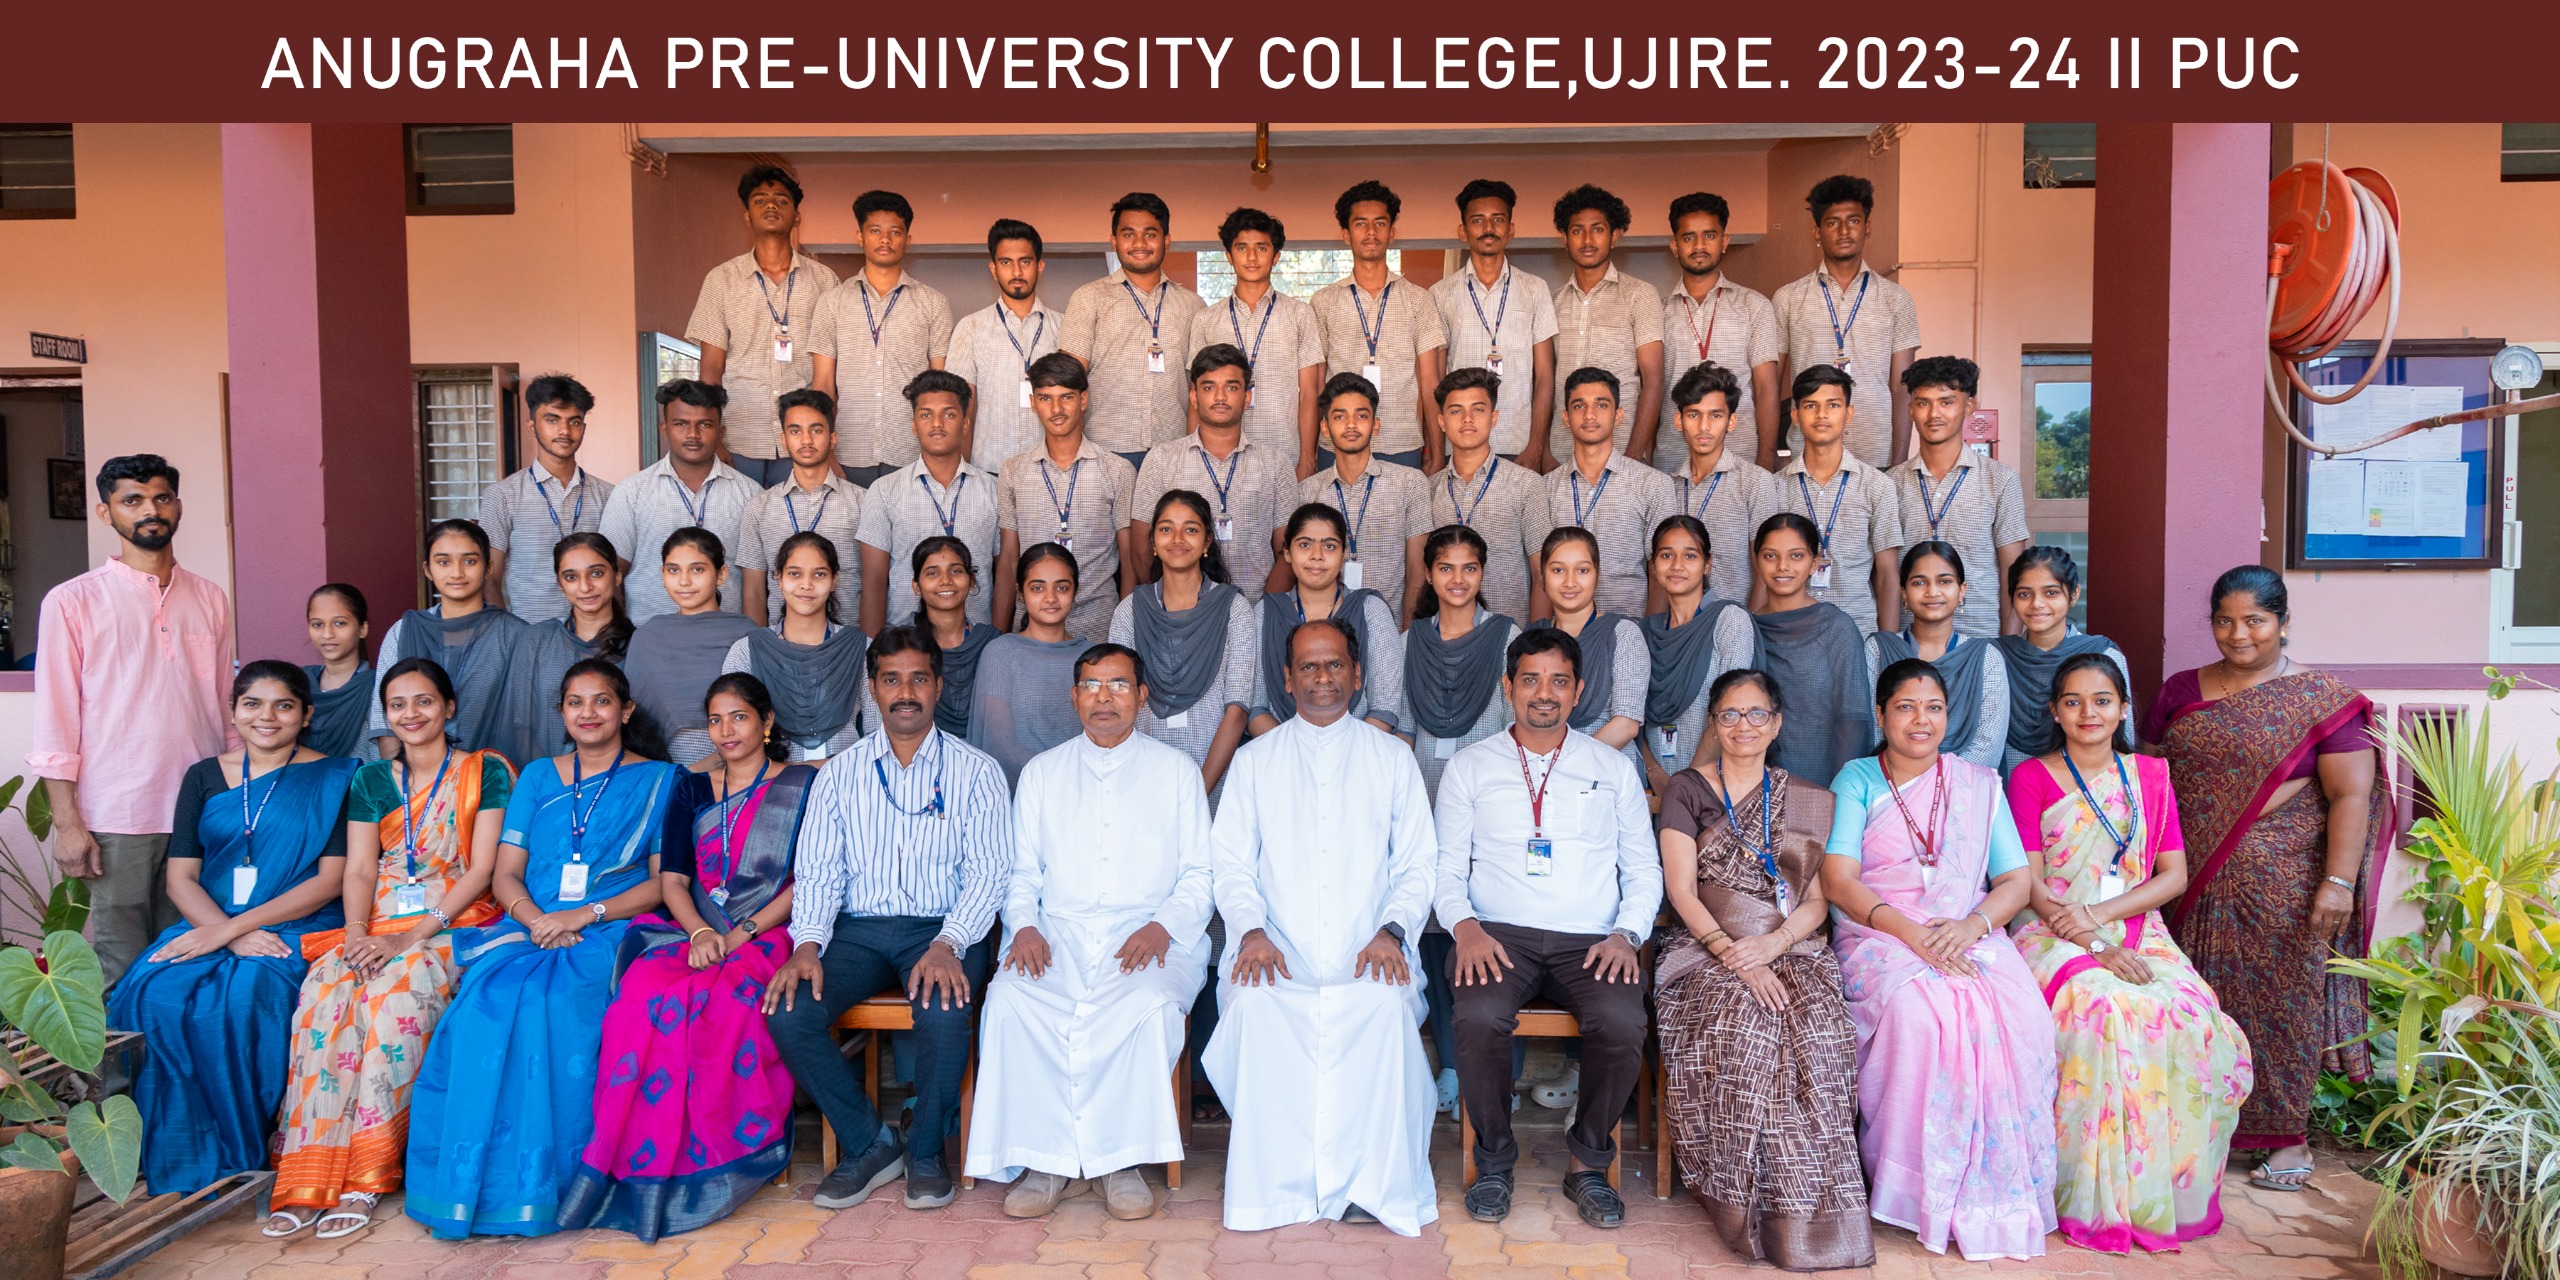 Anugraha Pre University College, Ujire Celebrates Remarkable Success with 100% Results in II PUC Board Examination